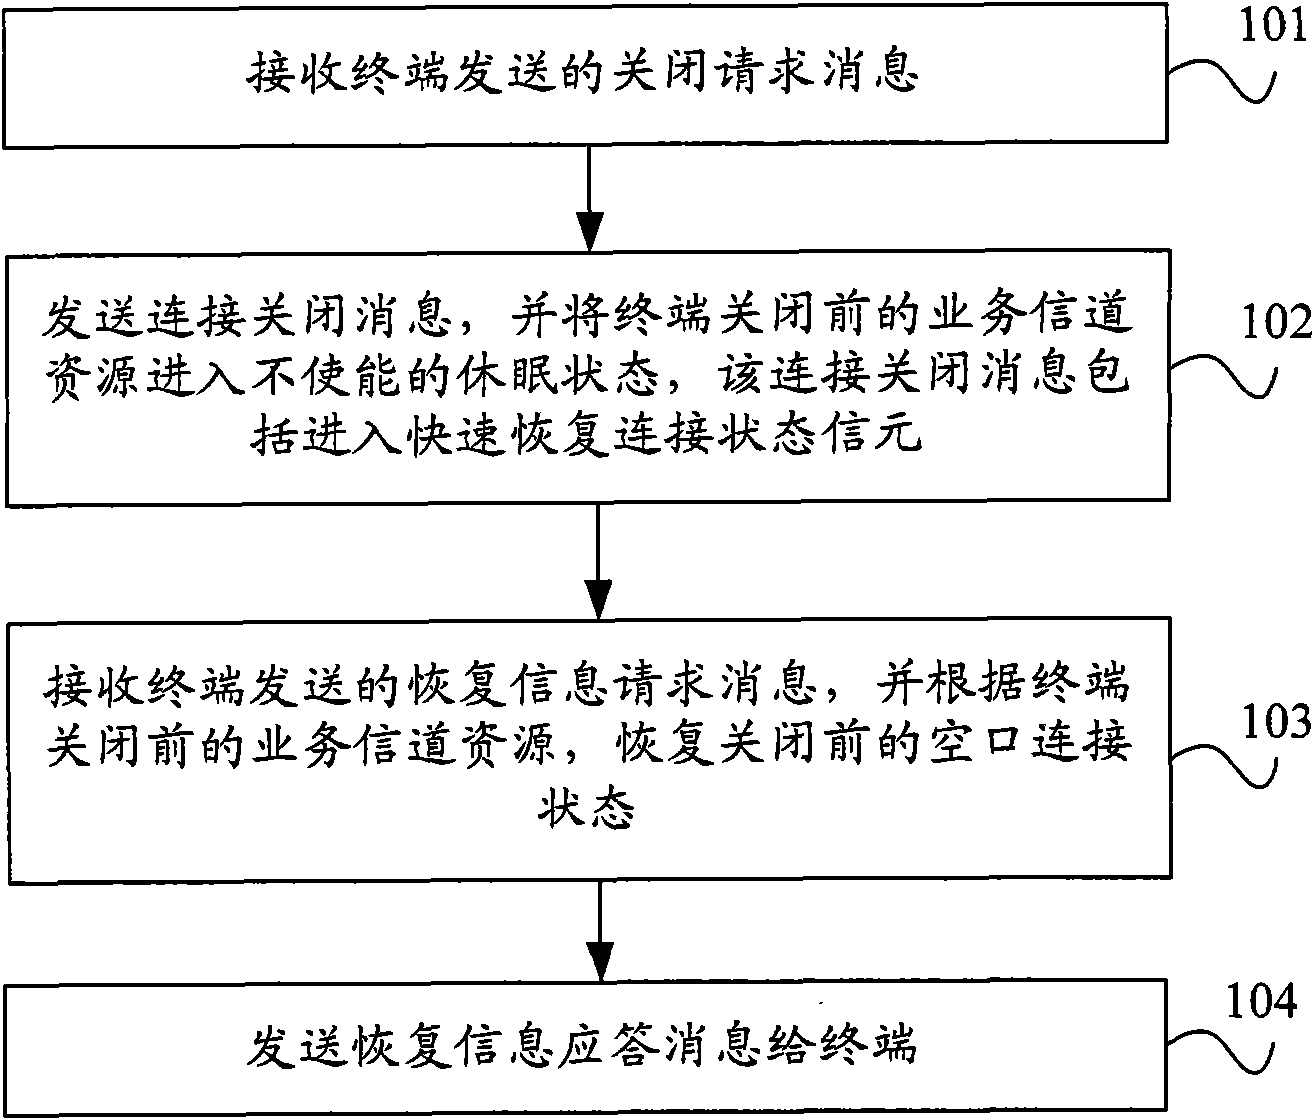 Signaling processing method and system, network side equipment and terminal